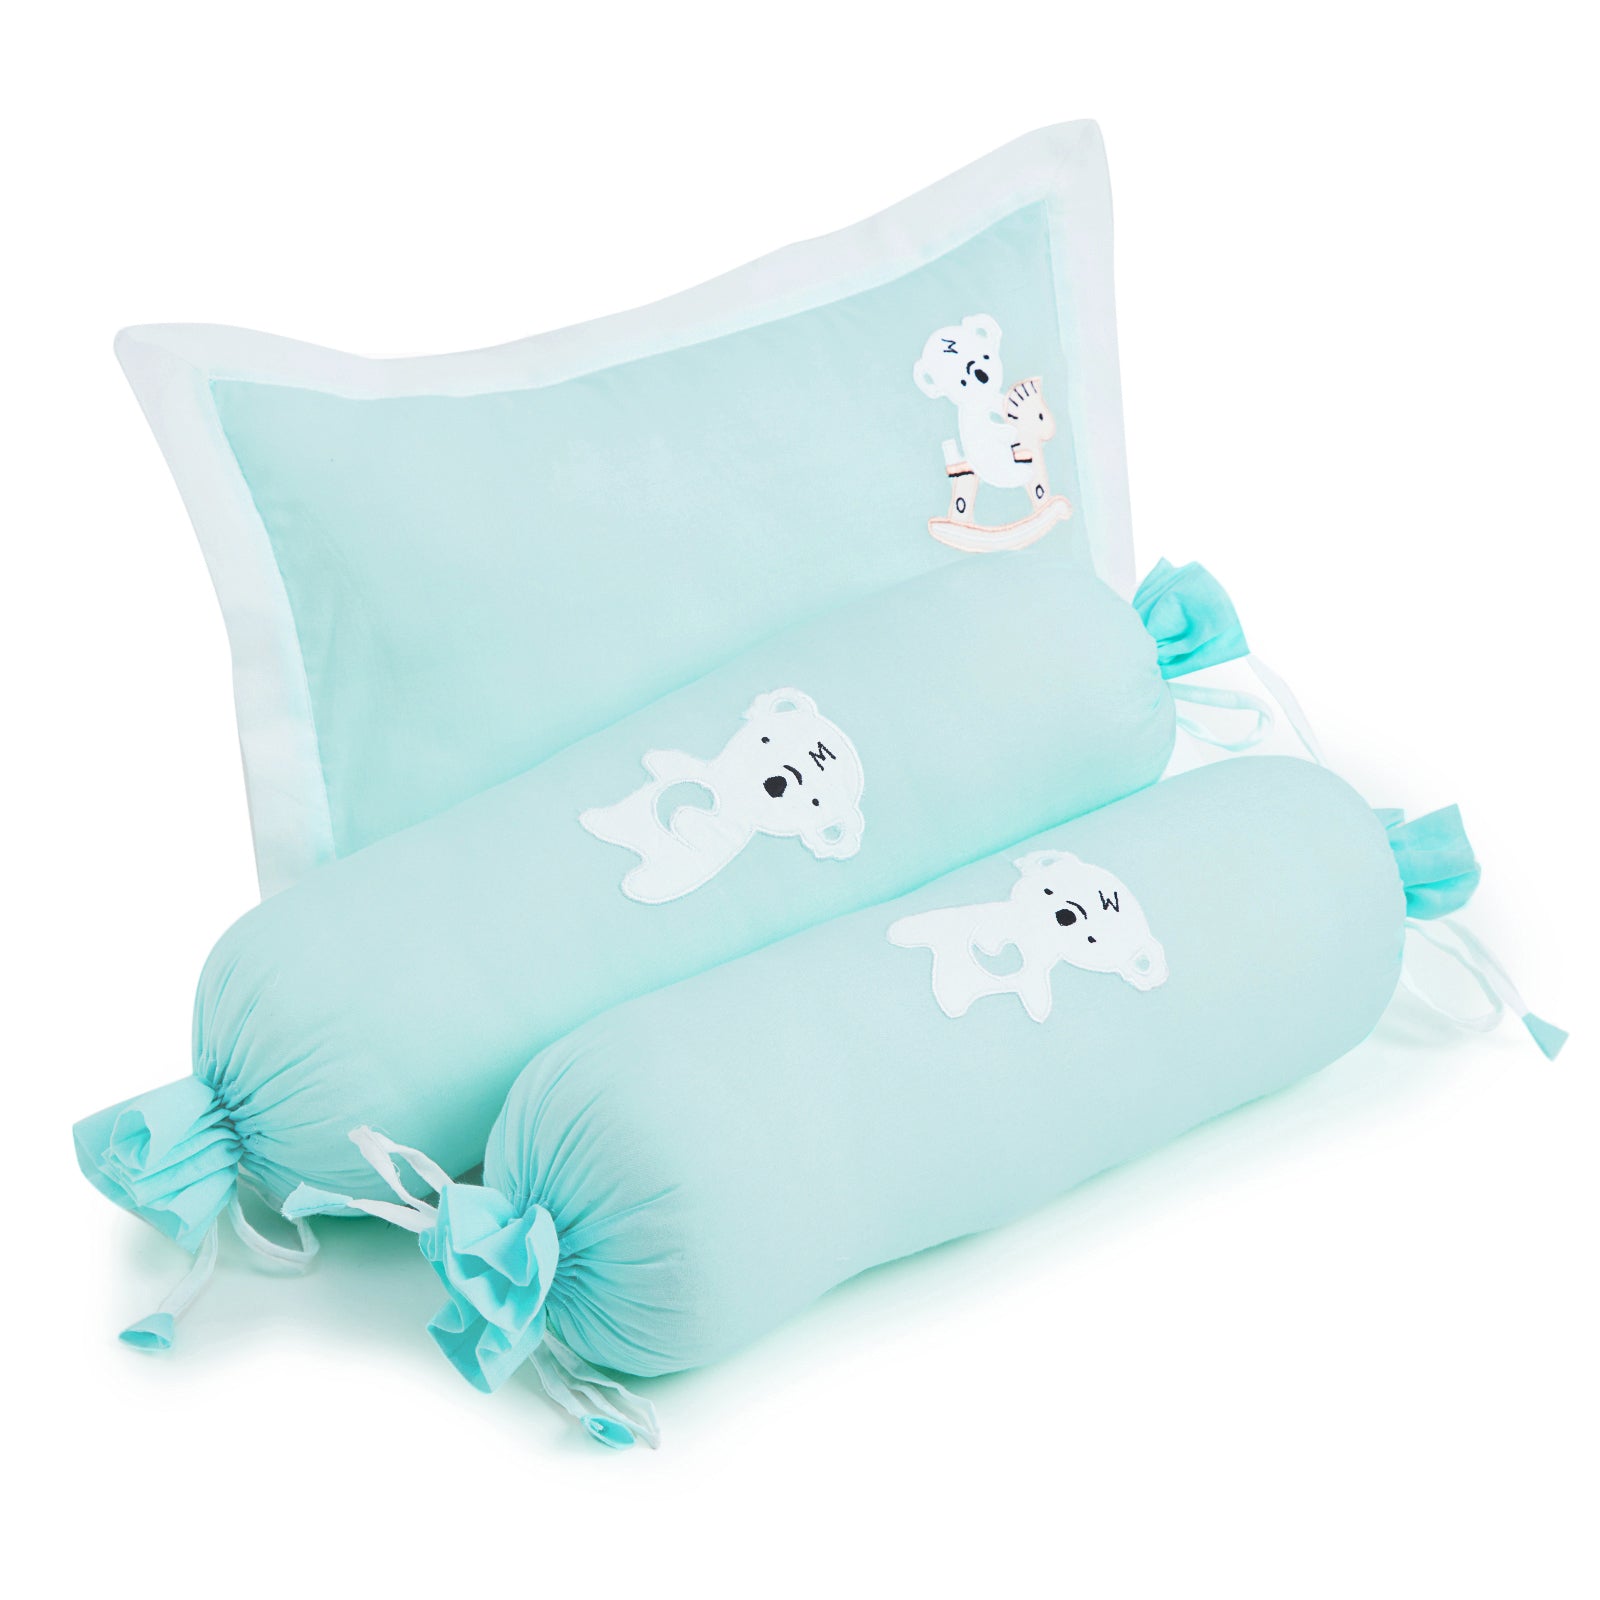 The White Cradle Cot Pillow + 2 Bolsters Set with Fillers - Organic Cotton Fabric, Protective Comfort, Softest Fiber Filling  - Blue Koala